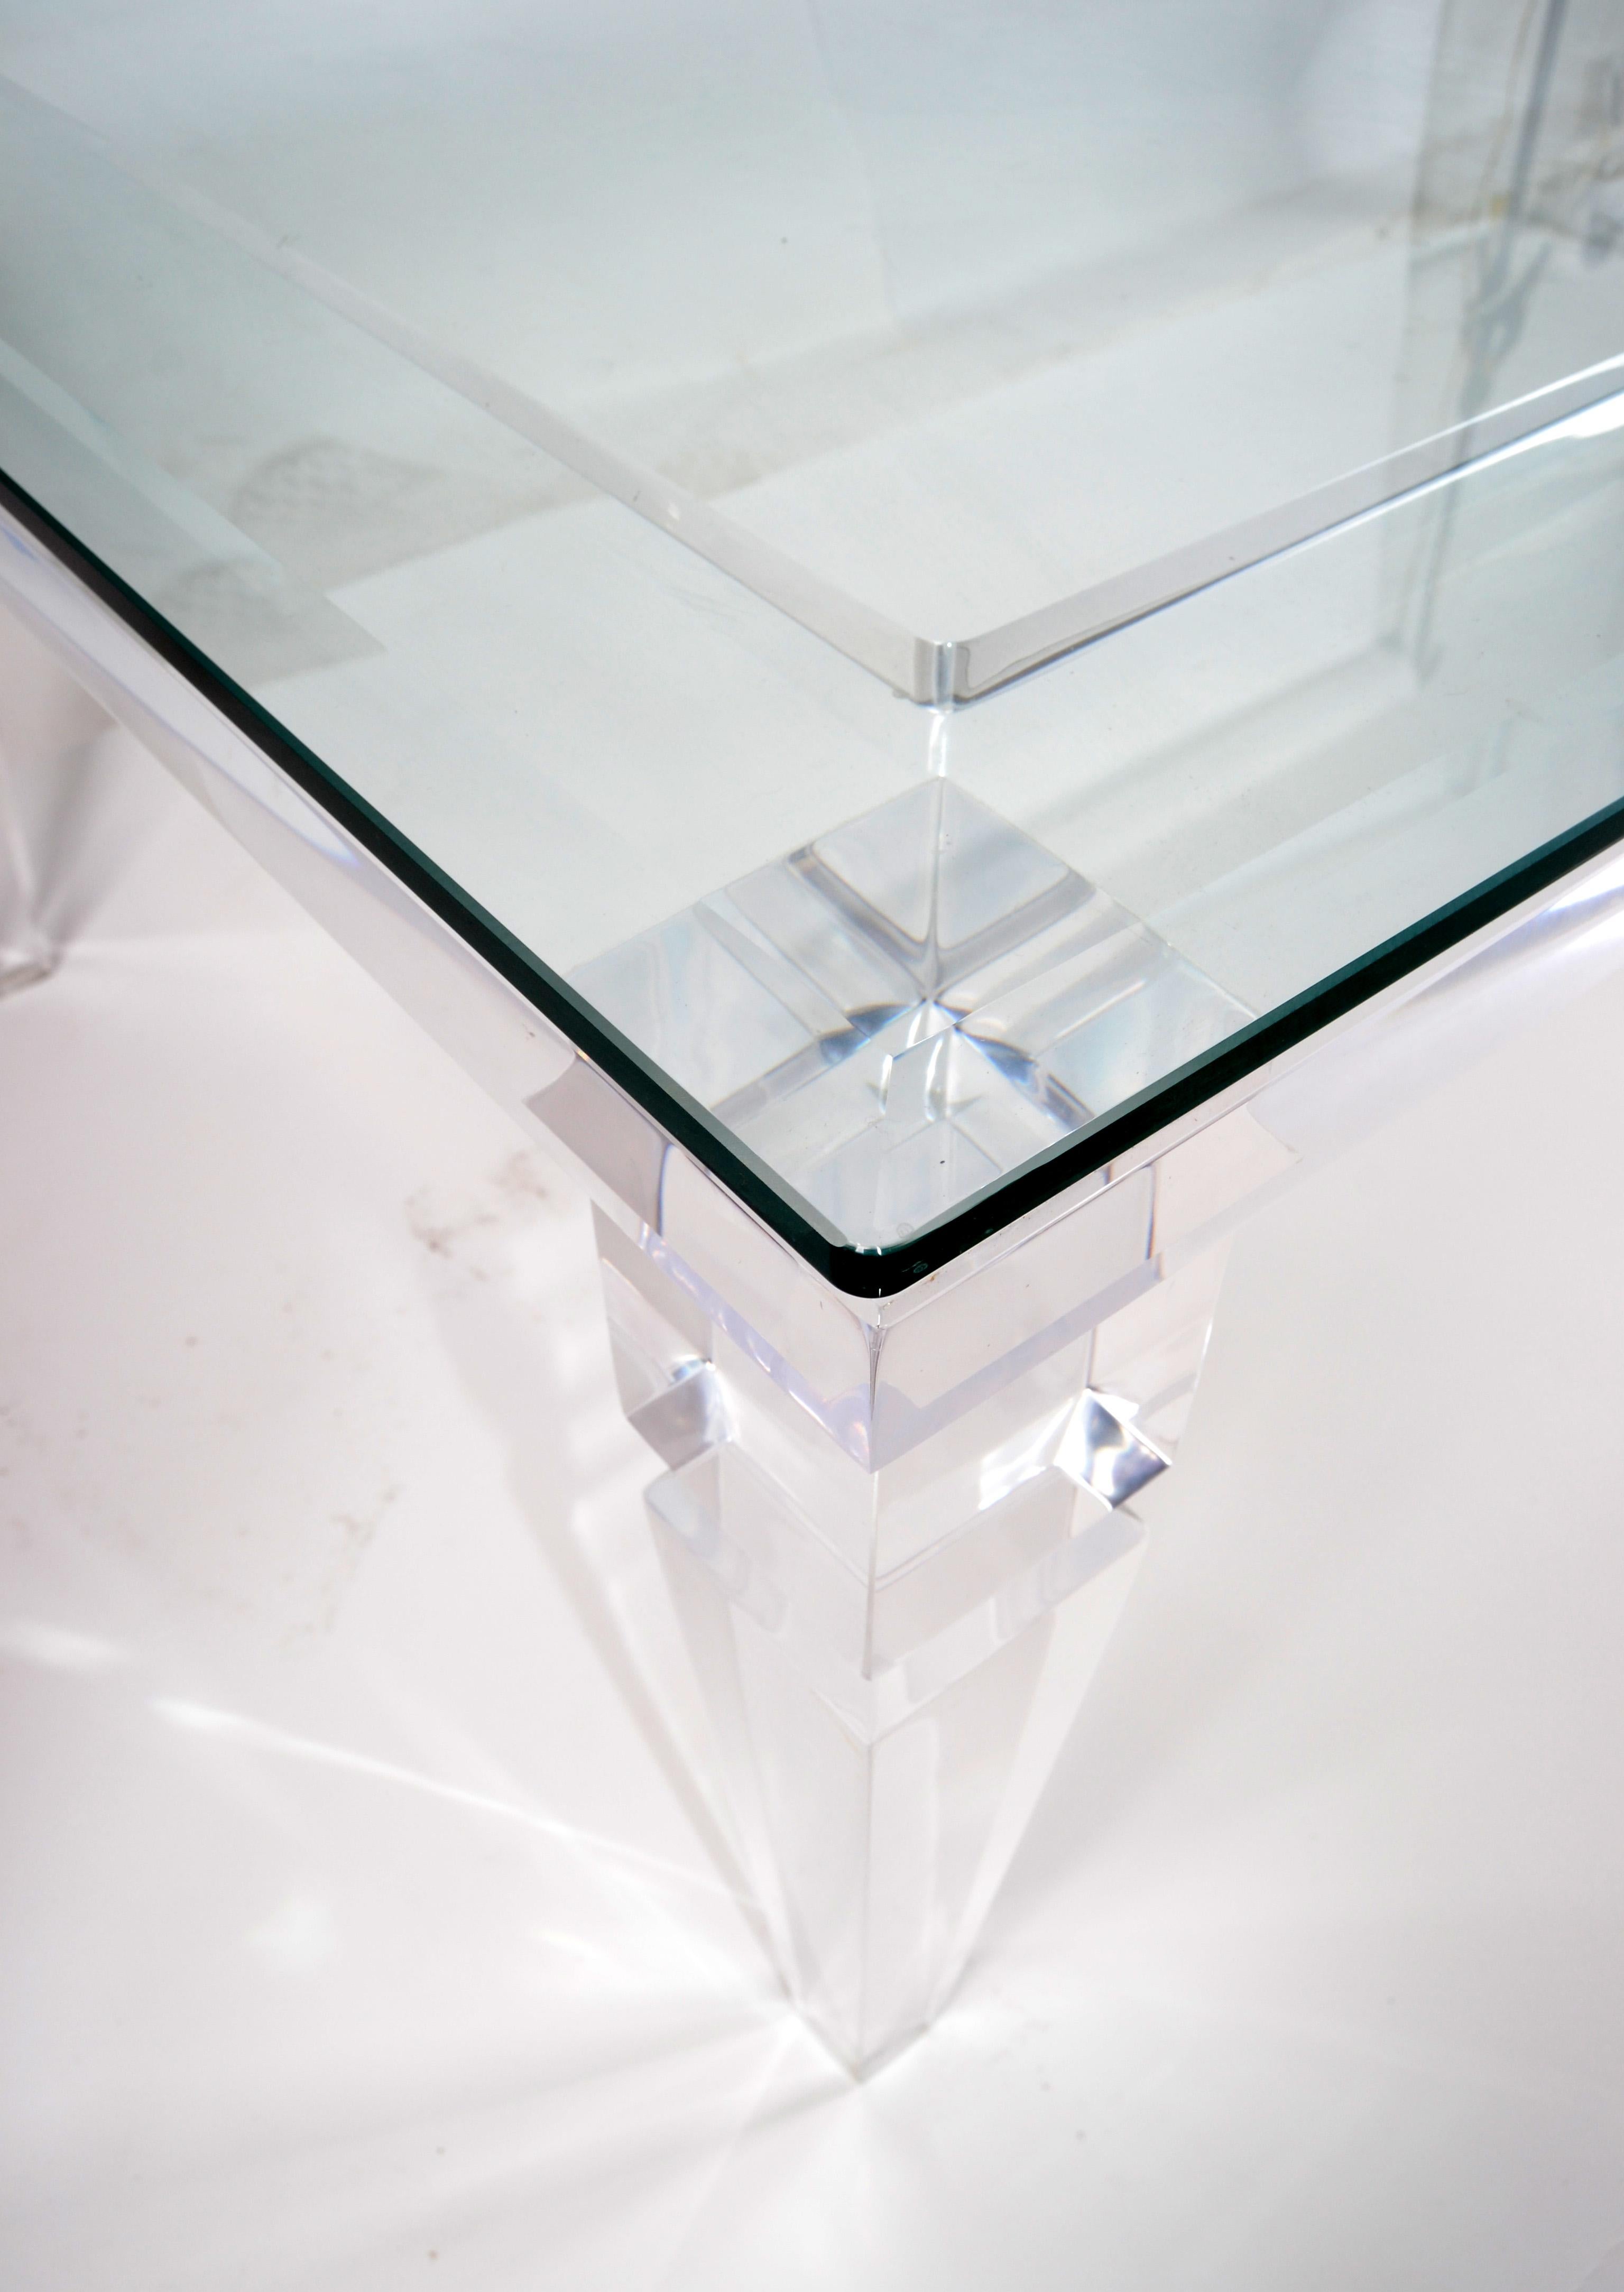 Charles Hollis Jones Mid-Century Modern Lucite & Beveled Glass Coffee Table 1970 For Sale 2